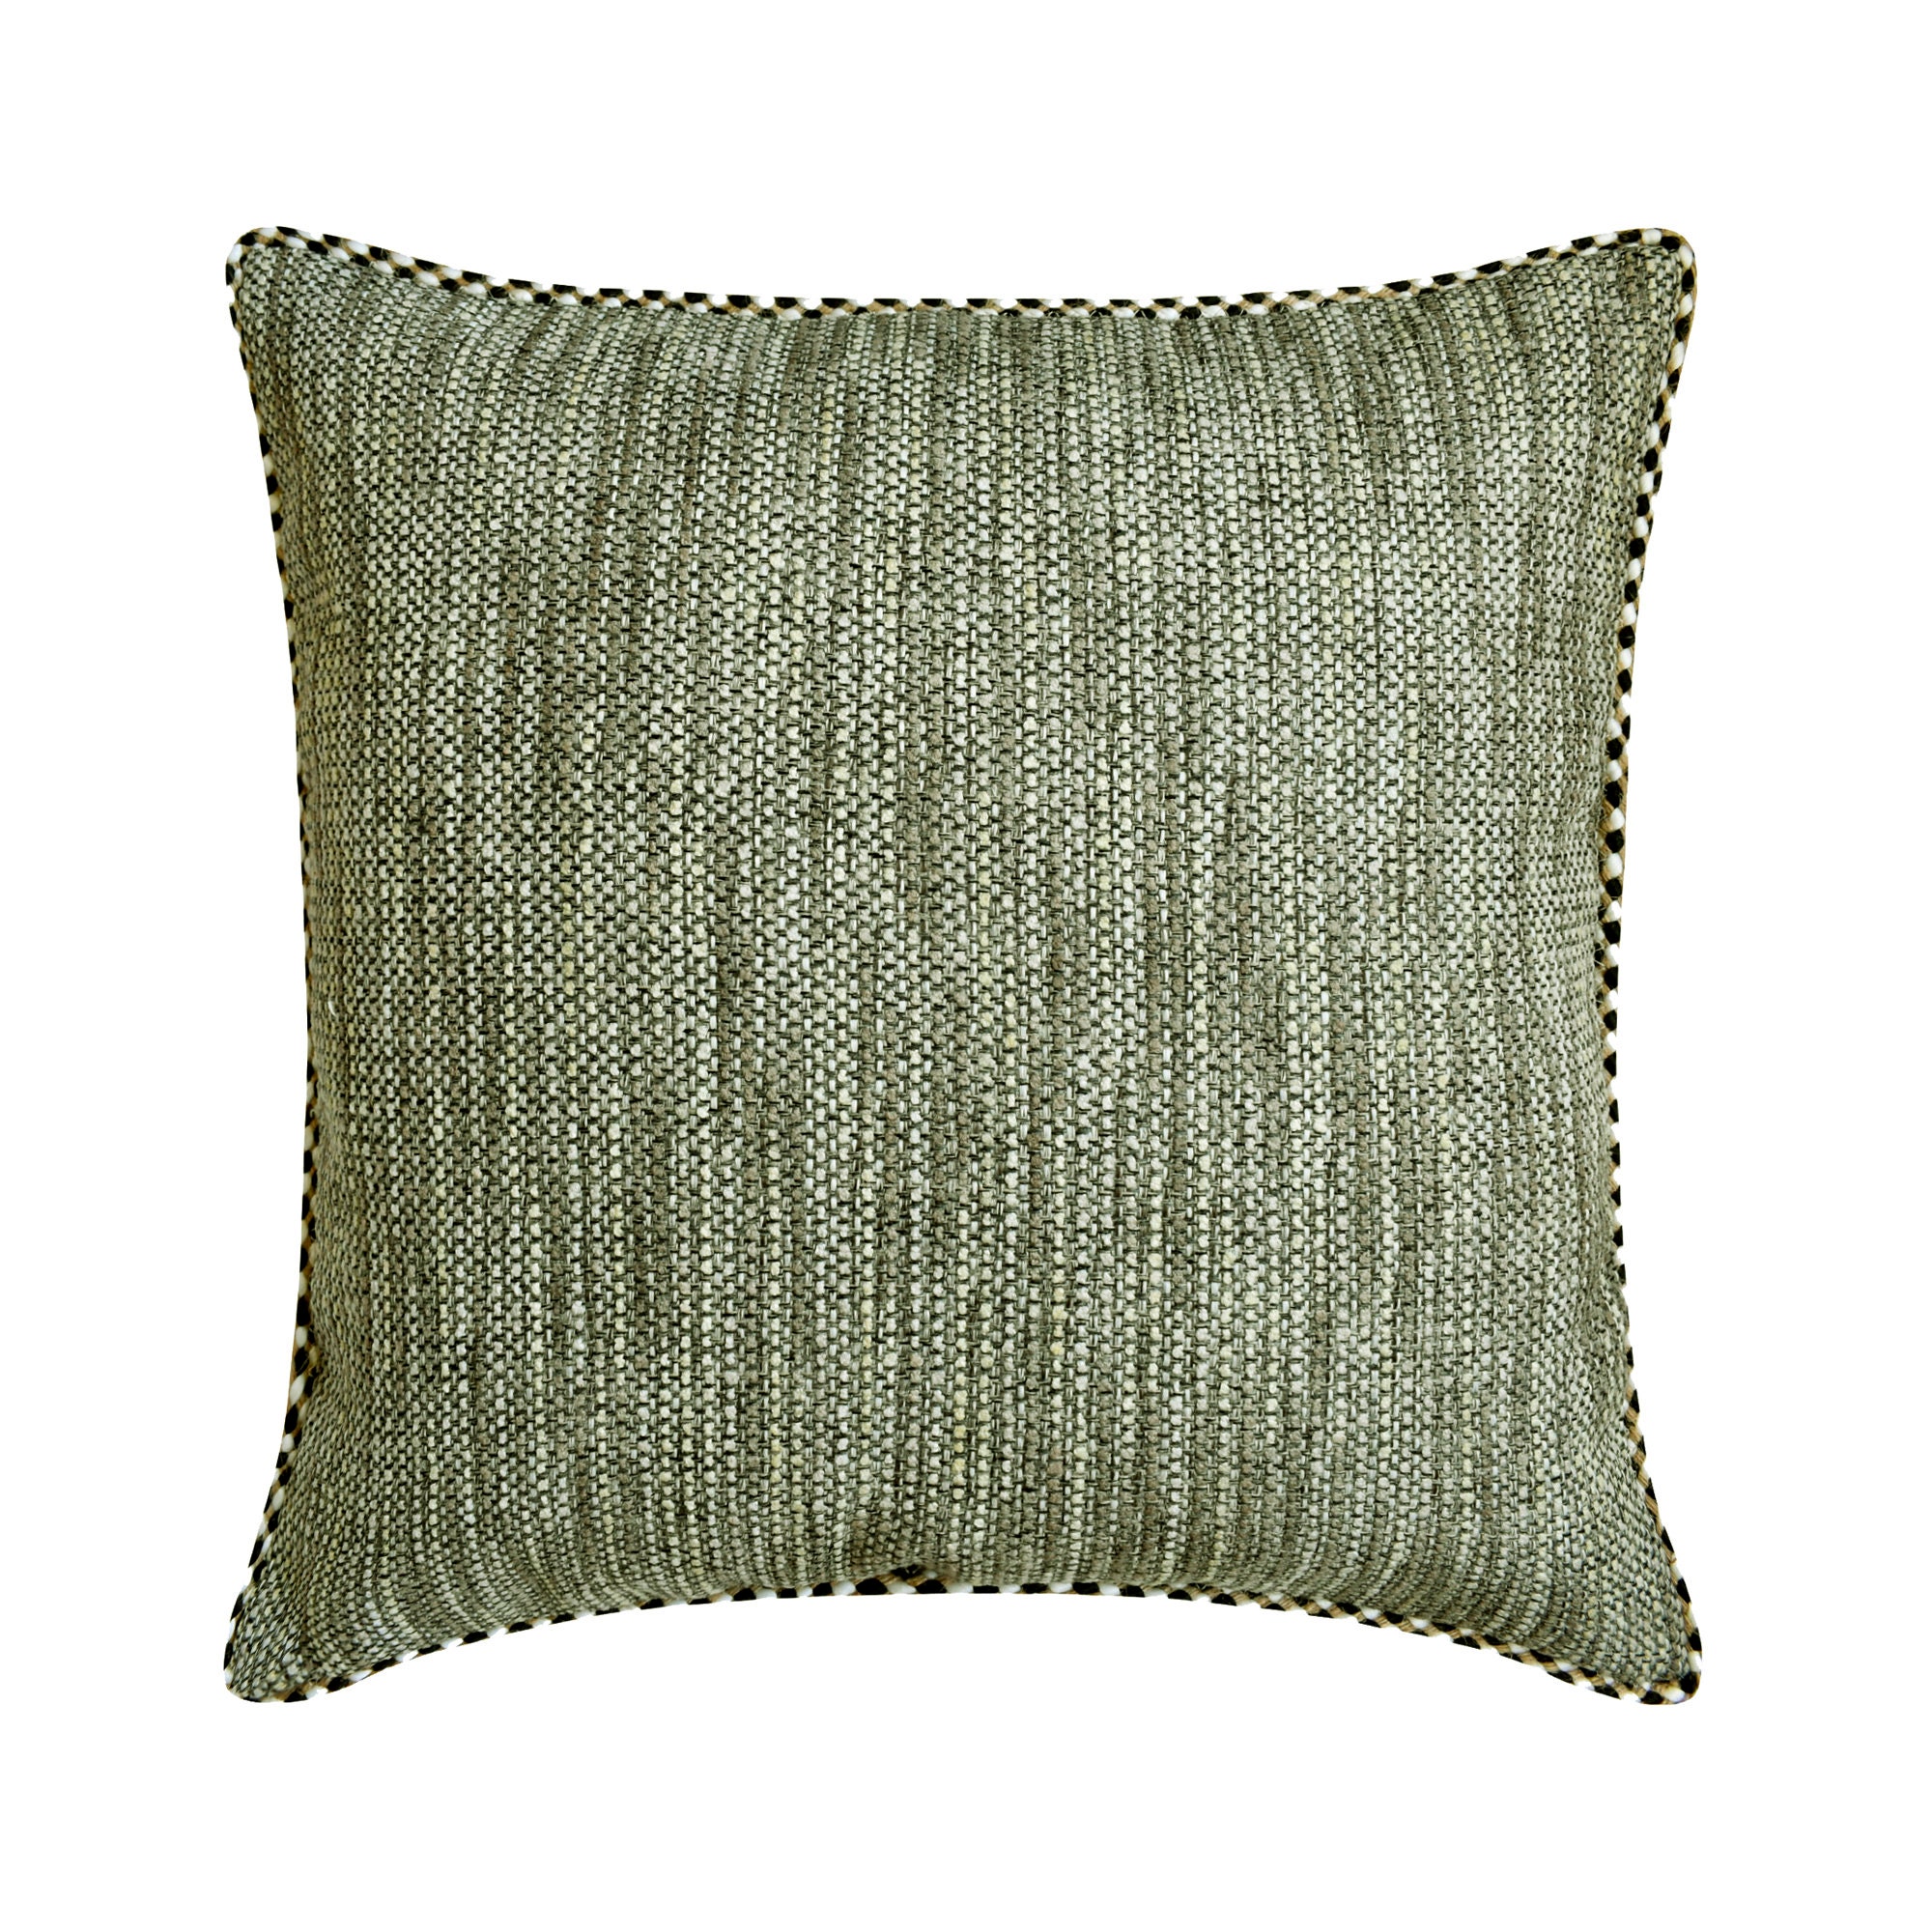 AQOTHES Pack of 2 Sage Green Throw Pillow Covers with Buttons 12 x 20,  Burlap Linen Rustic Farmhouse Decorative Lumbar Throw Pillows for Couch  Sofa